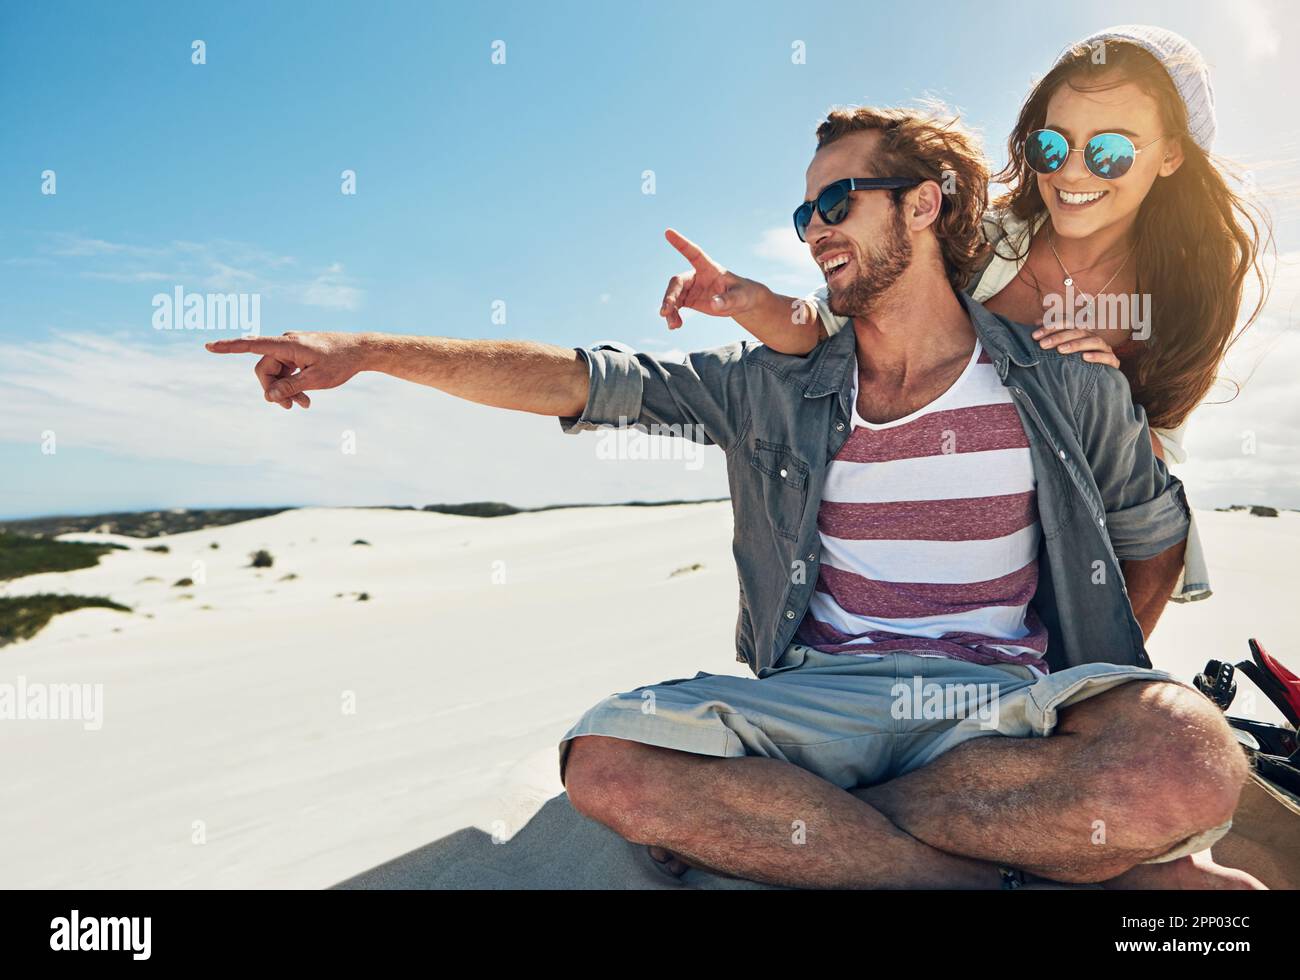 Lets ride that dune. a young couple sandboarding in the desert. Stock Photo